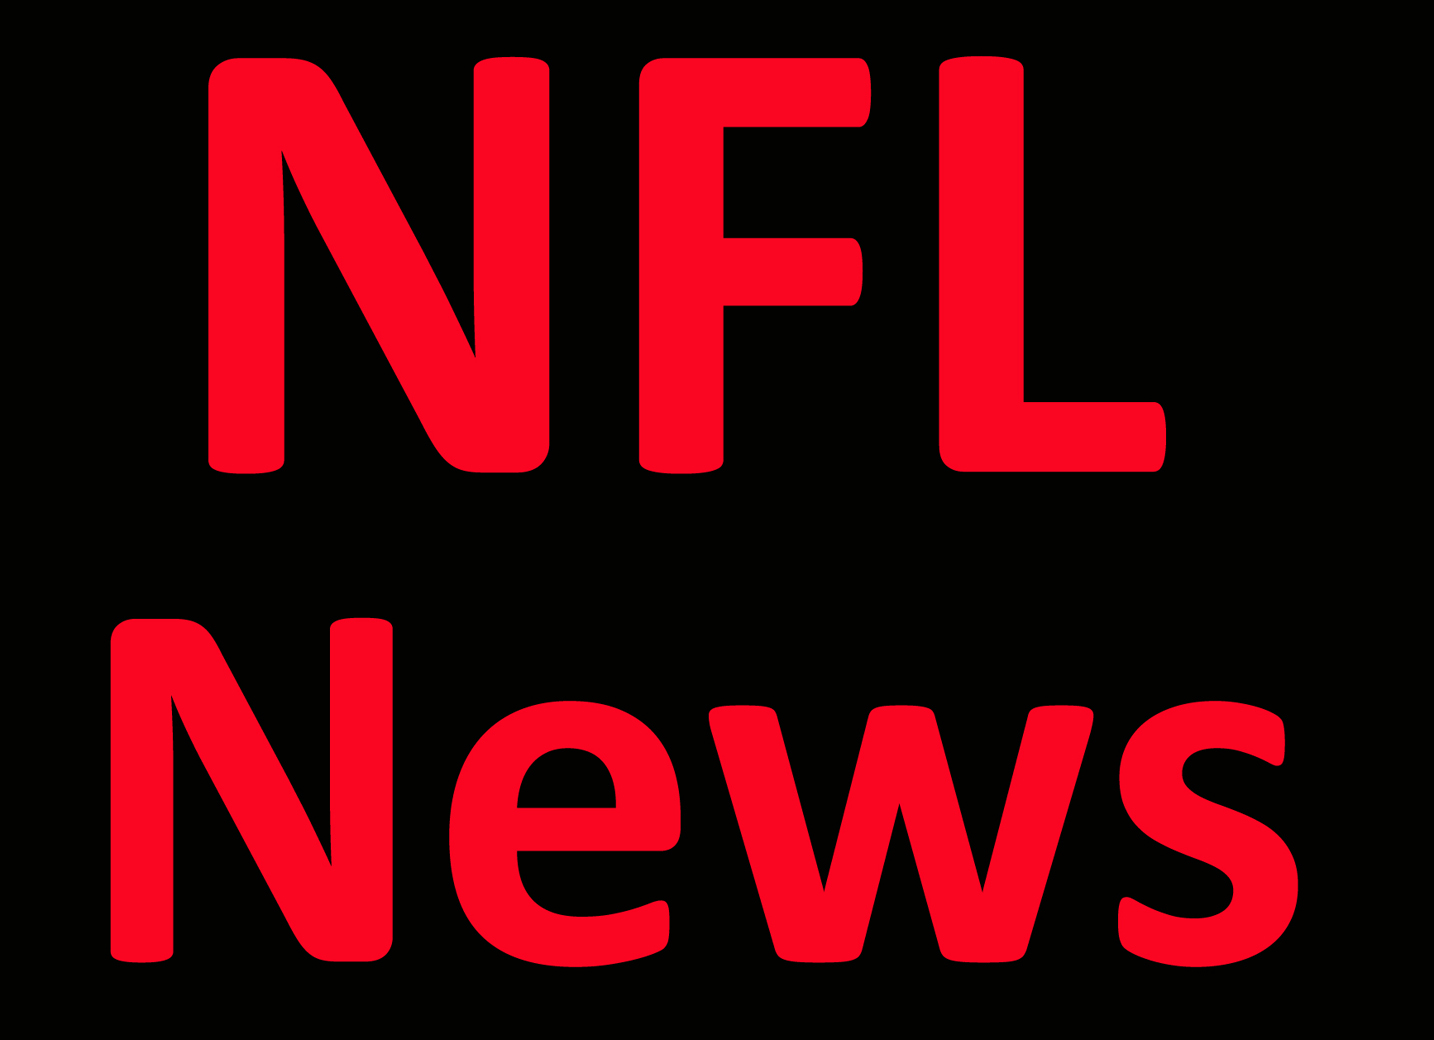 NFL News: NFL playoff bracket: AFC, NFC and Super Bowl schedule, seeding, TV times, dates and locations Per Report